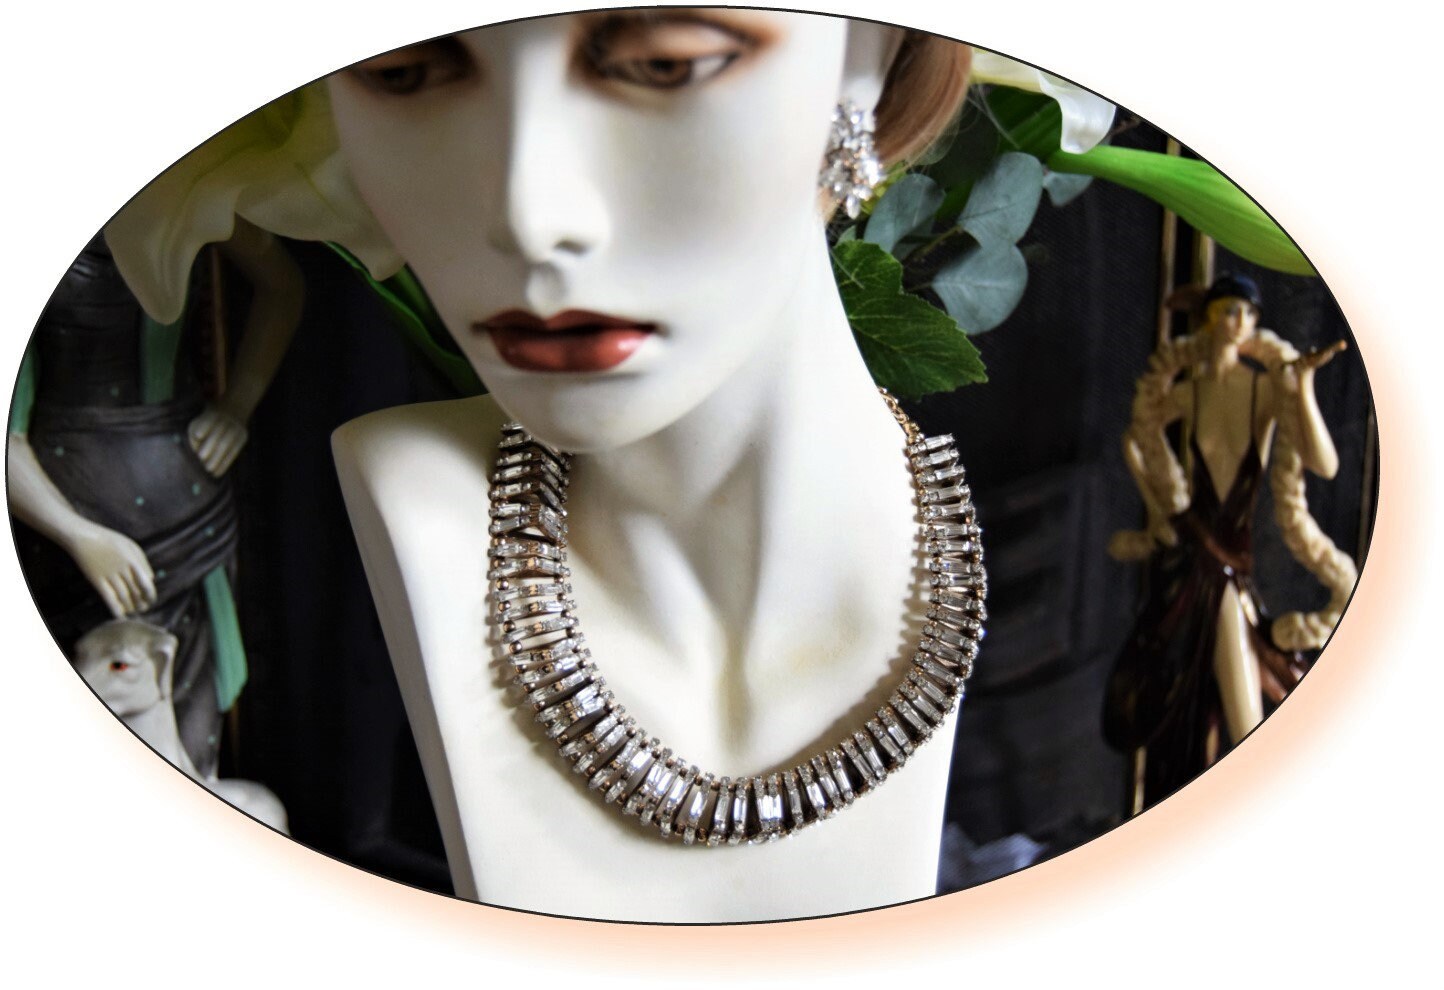 Beautiful Art Deco Cleopatra's  chunky gold 1920's Statement chain necklace with glass and rhinestones